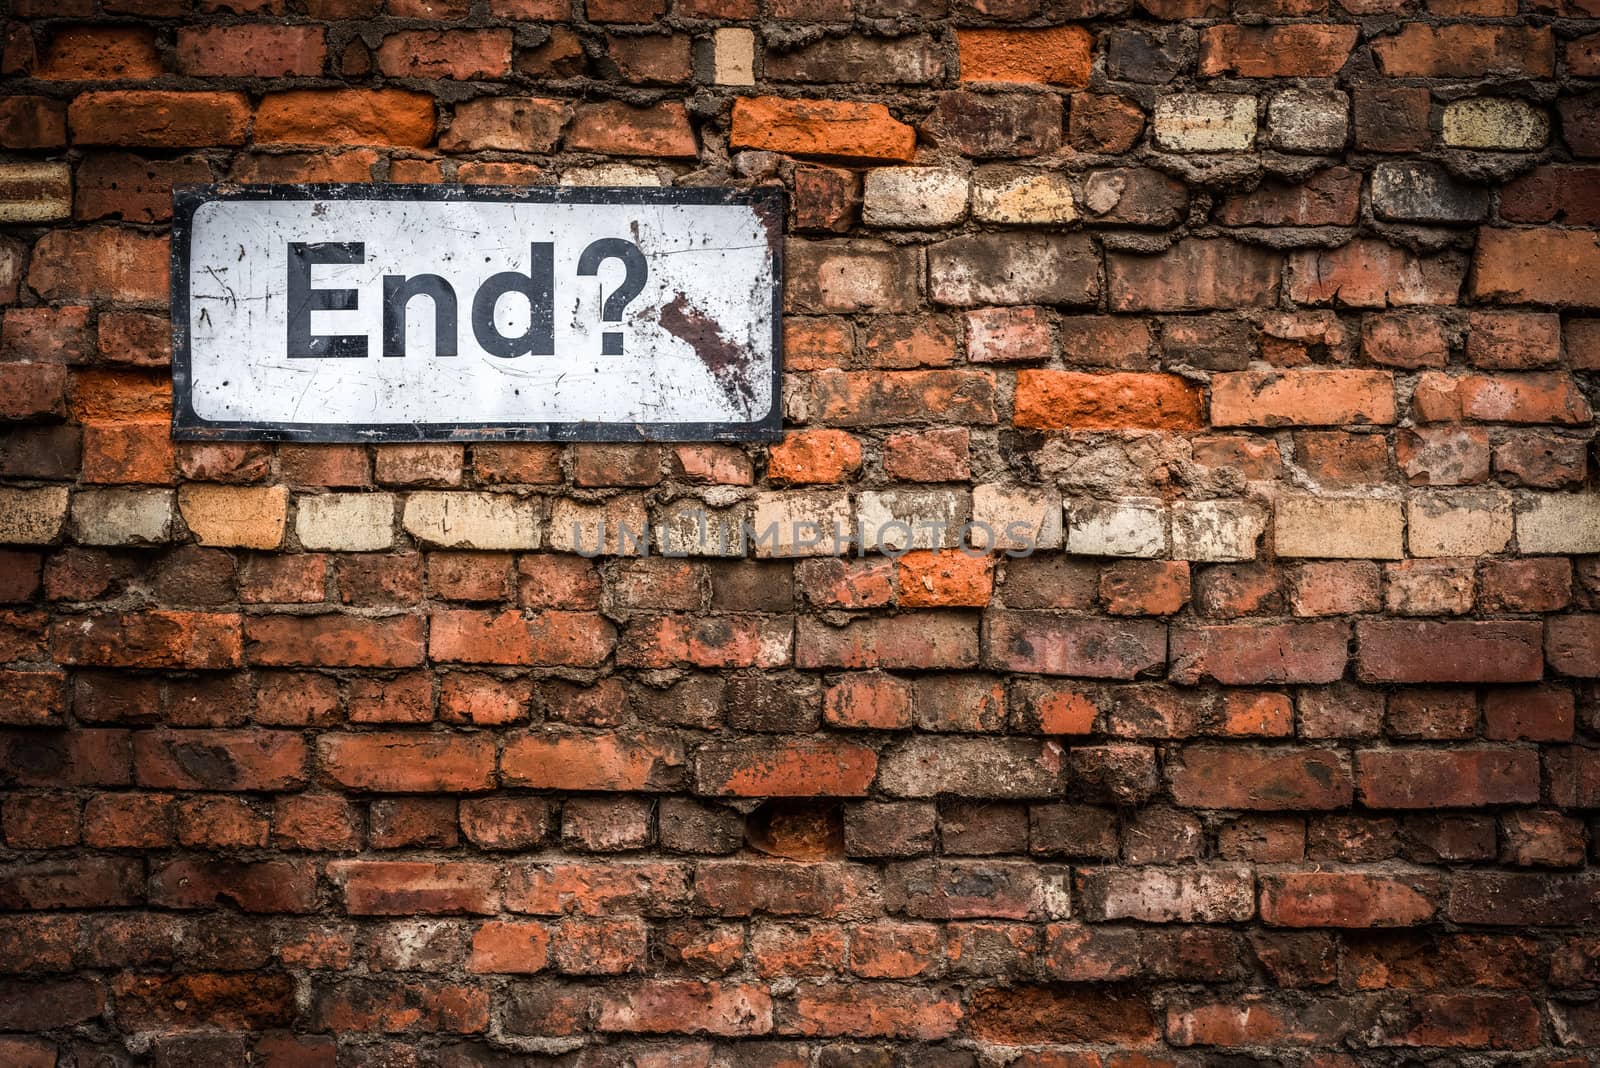 Uncertainty Concept Image Of A Grungy Sign Saying End? On An Old Red Brick Wall